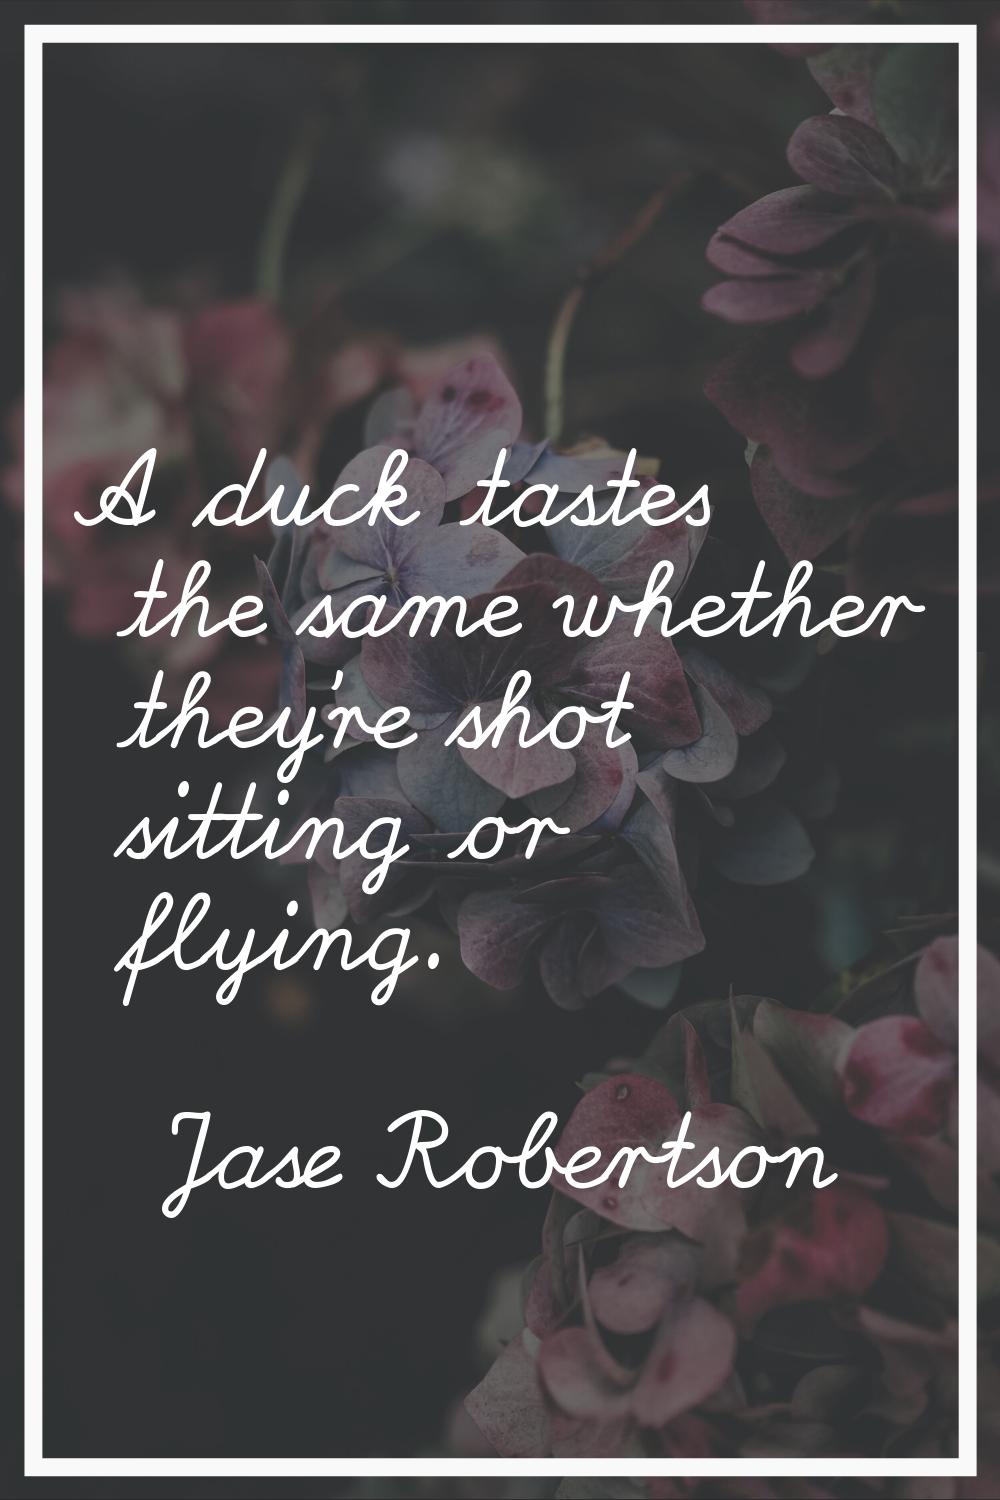 A duck tastes the same whether they're shot sitting or flying.